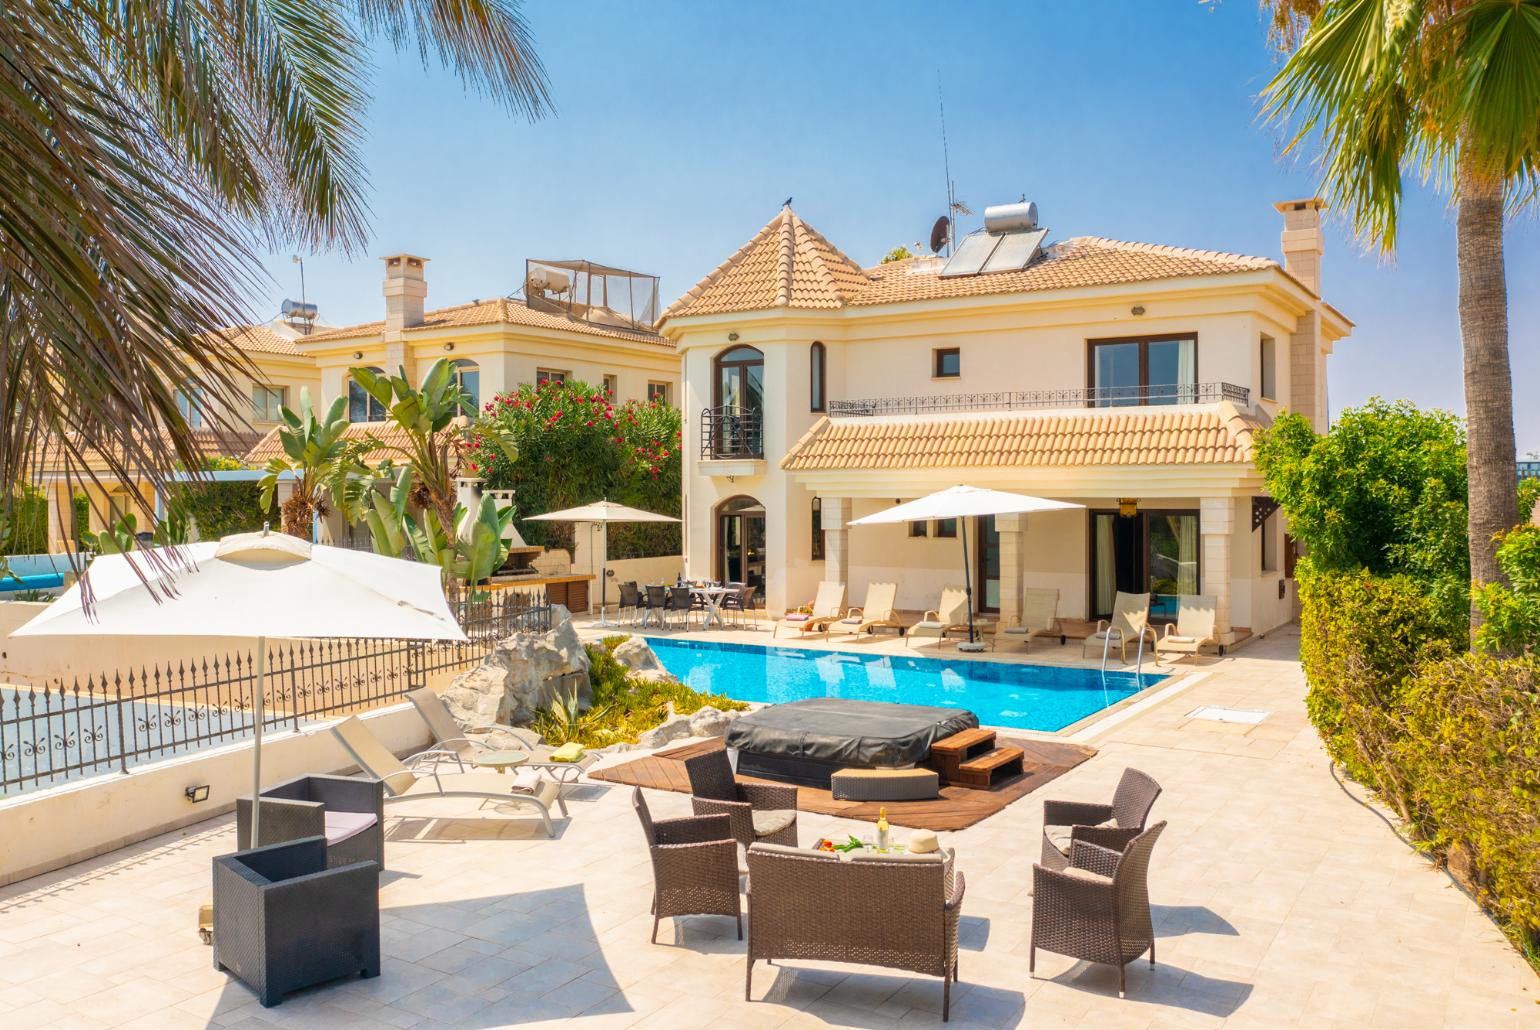 Beautiful villa with private pool, jacuzzi, terrace, and garden with sea views